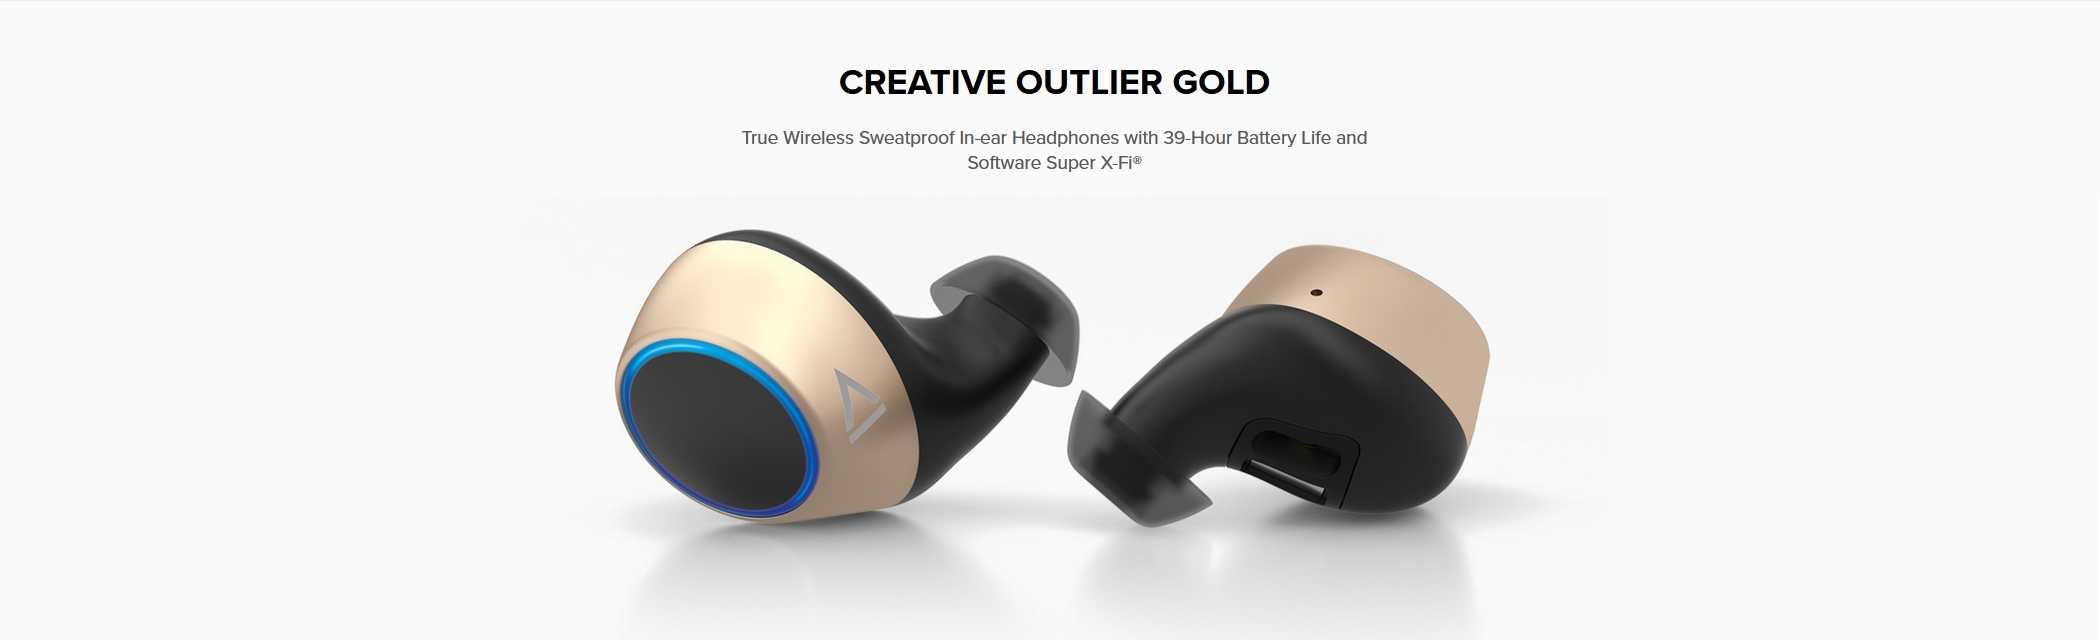 Creative outlier gold true wireless earphones have a little extra